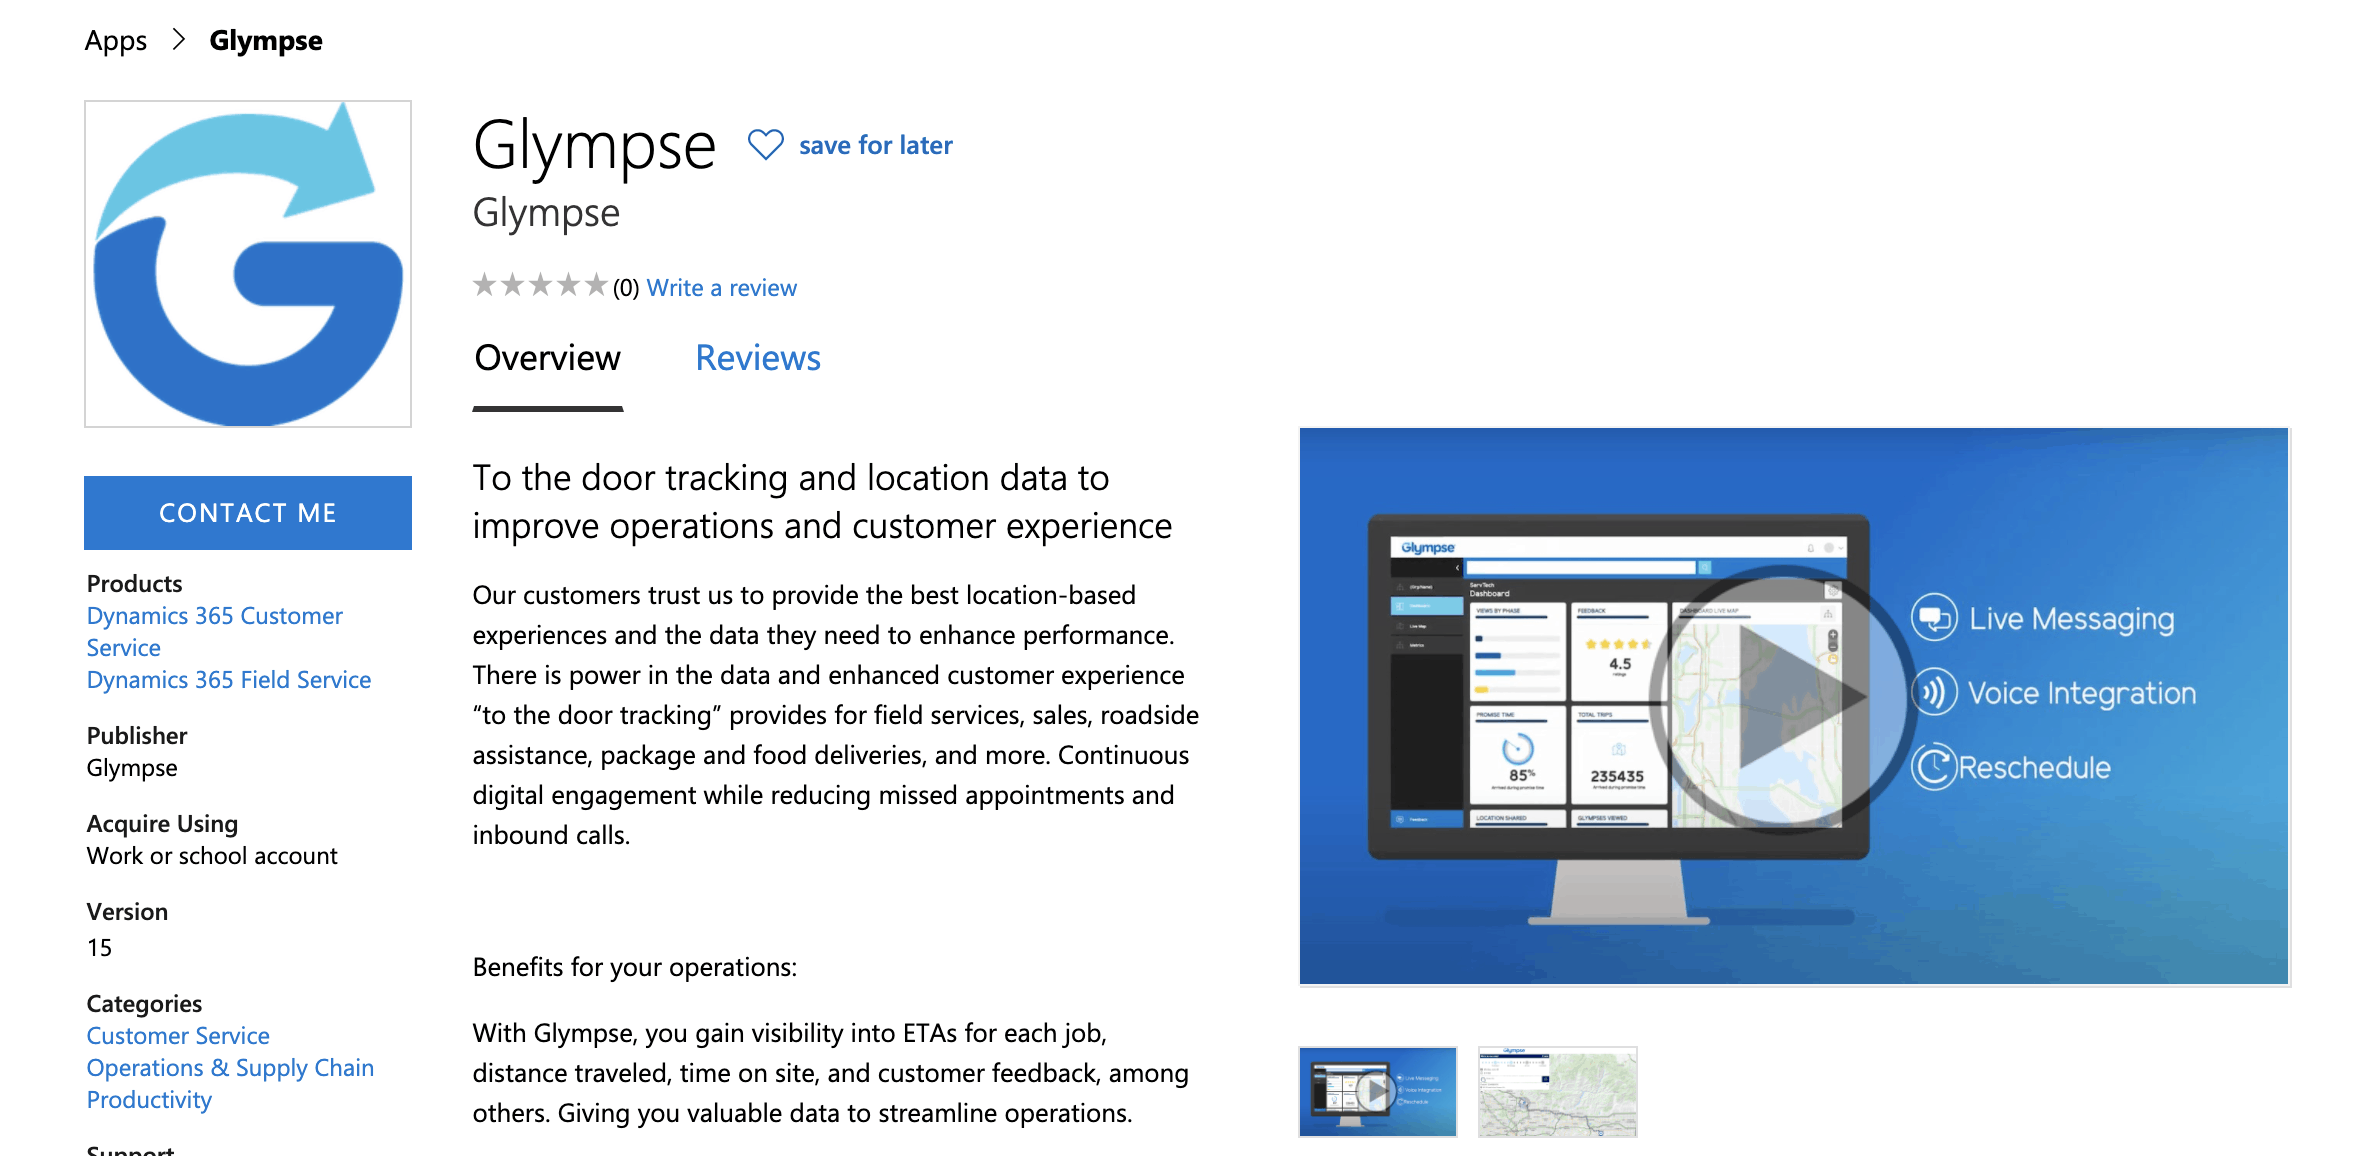 Glympse is on Microsoft Appsource